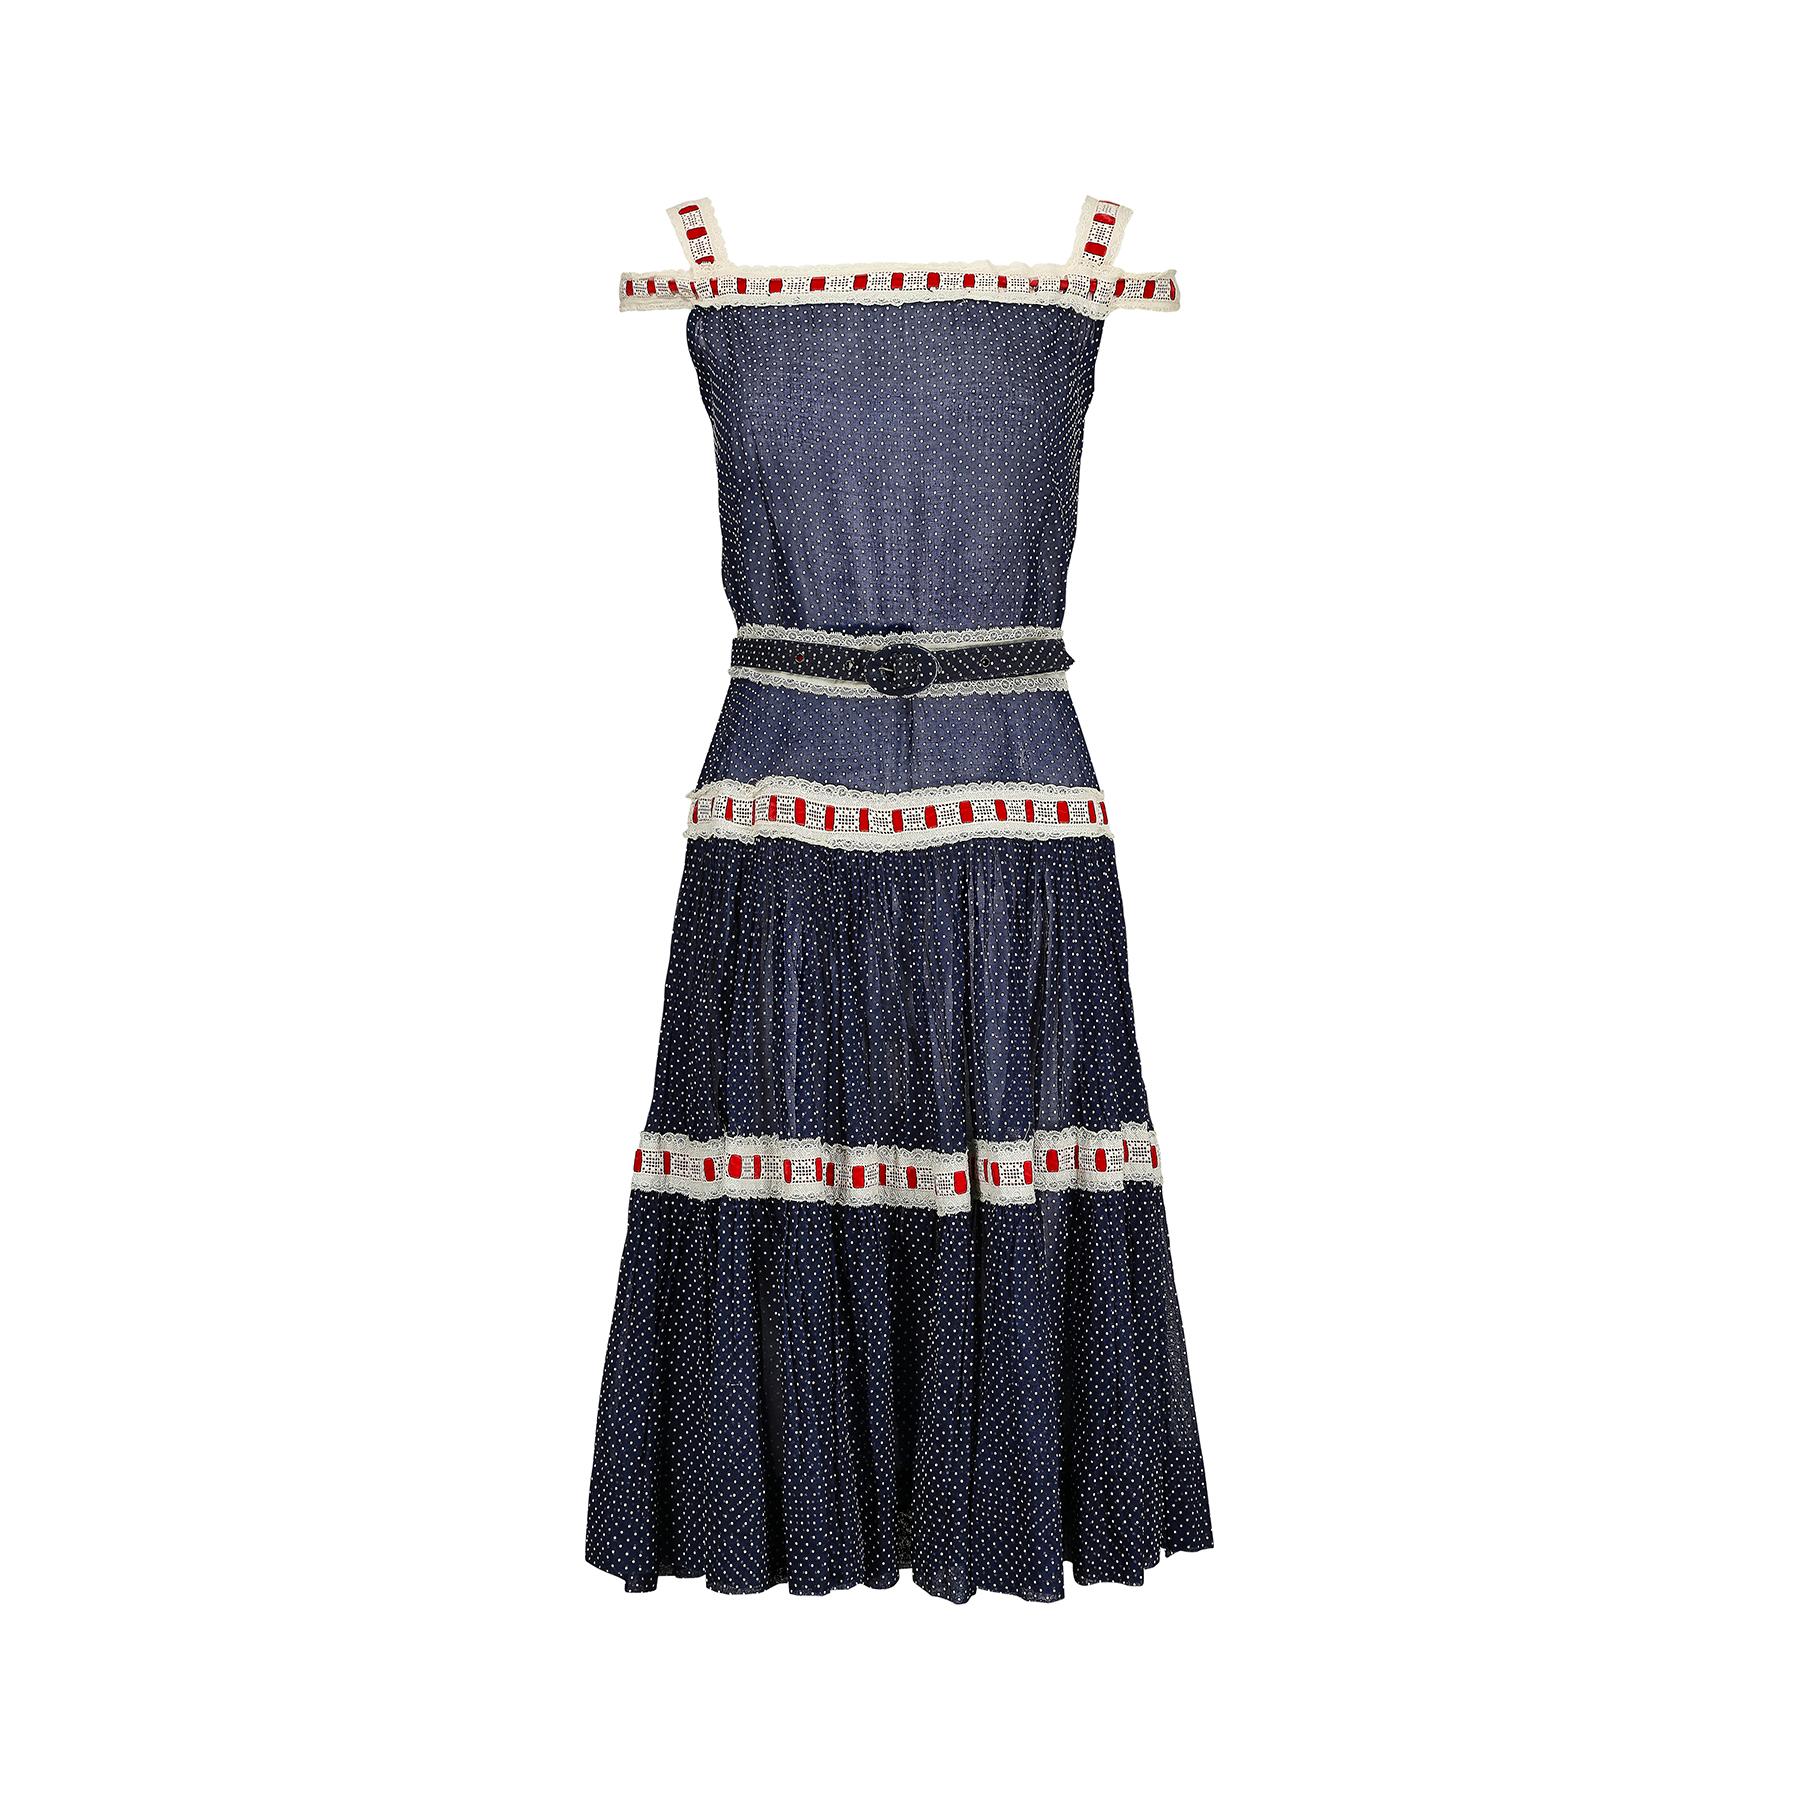 This is an unusual 1950s dress ensemble made from navy sheer cotton organza with a Swiss-dot print. It is trimmed with cream eyelet lace and red velvet ribbon work that is reminiscent of embellishment from the 1920s and 30s. This trim makes up the